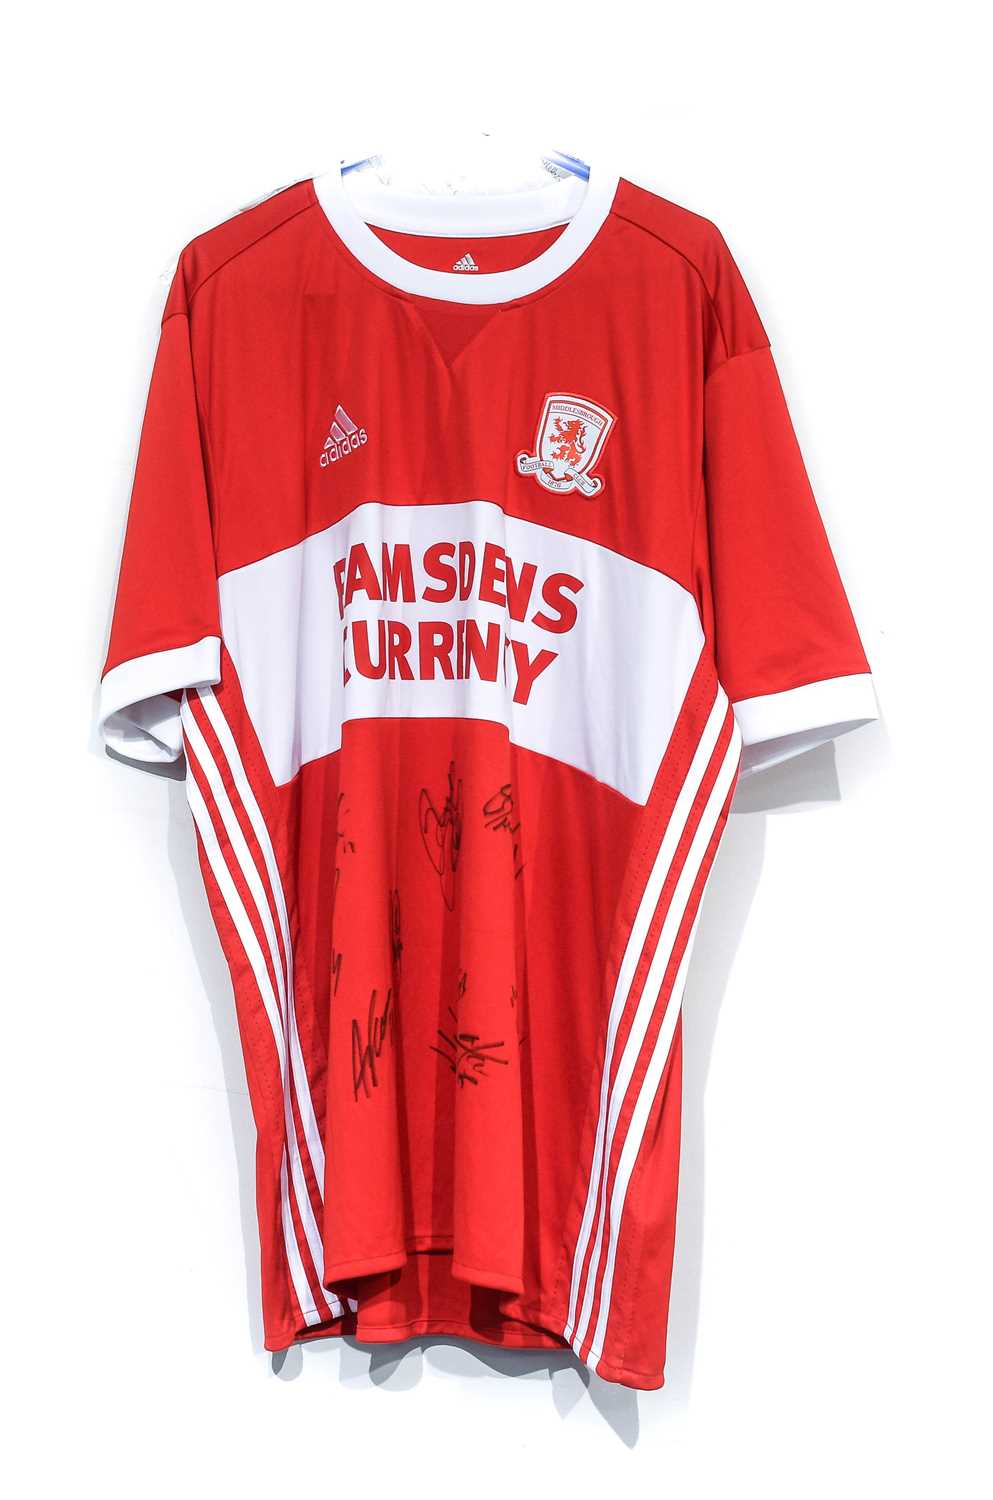 Middlesbrough Three Signed Football Shirts - Image 3 of 7